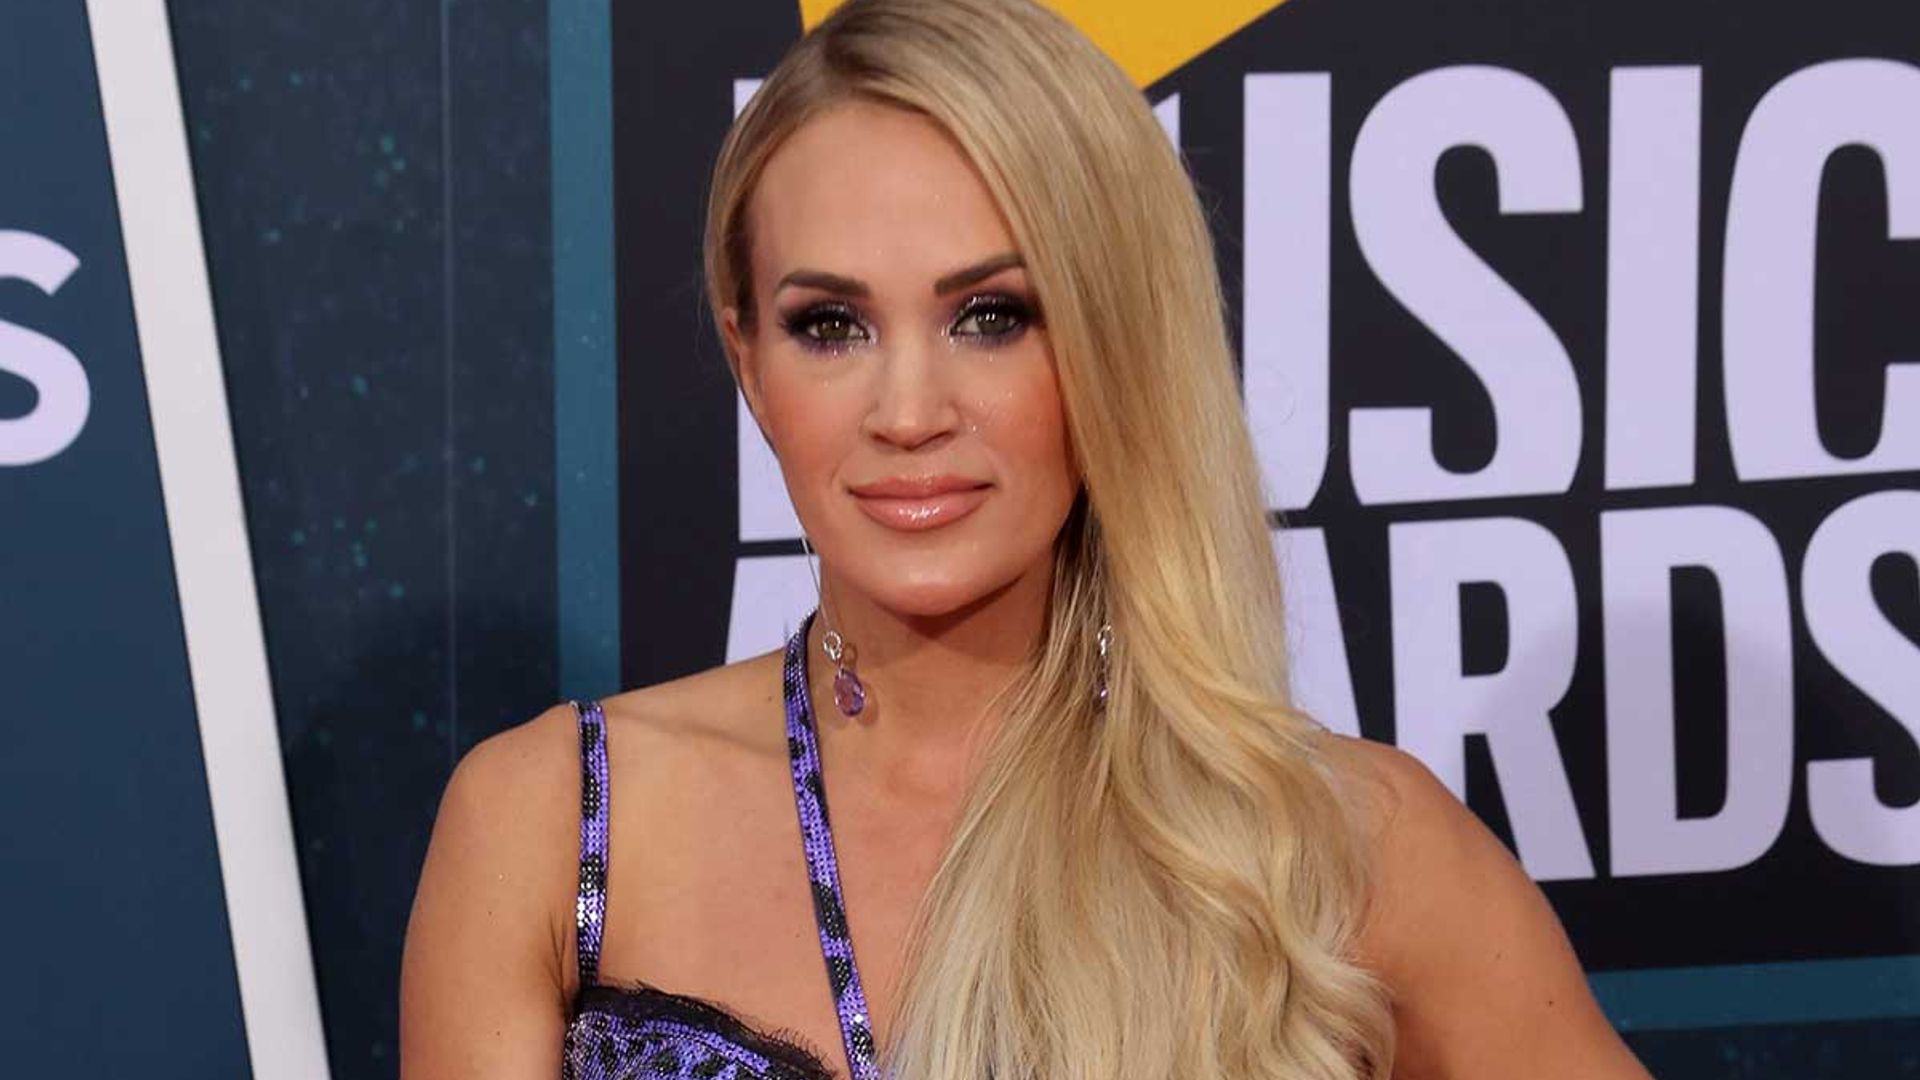 carrie underwood cmt music awards 2022